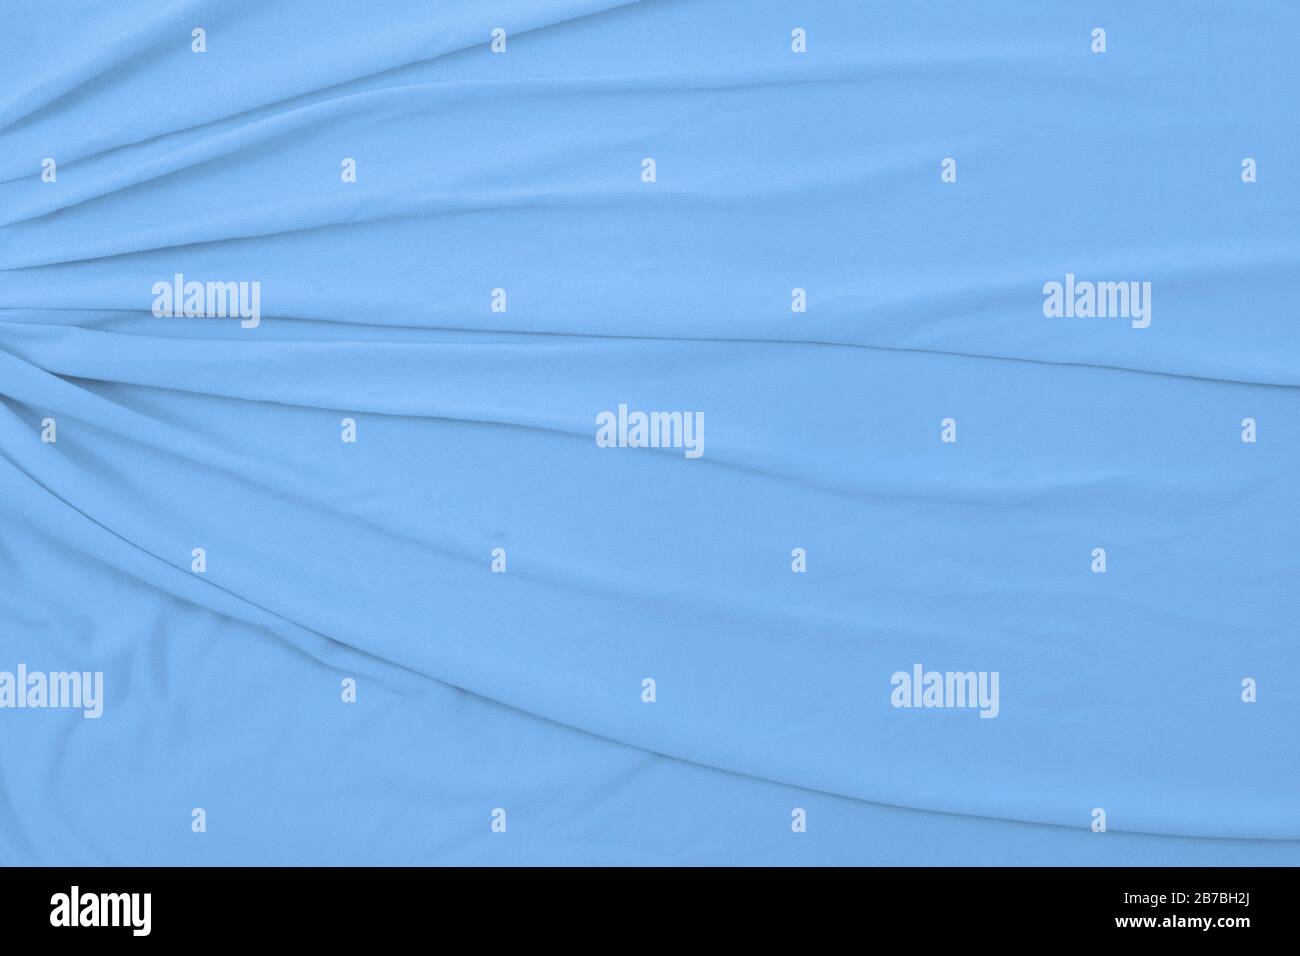 Top down view of flowing baby blue fabric. Stock Photo